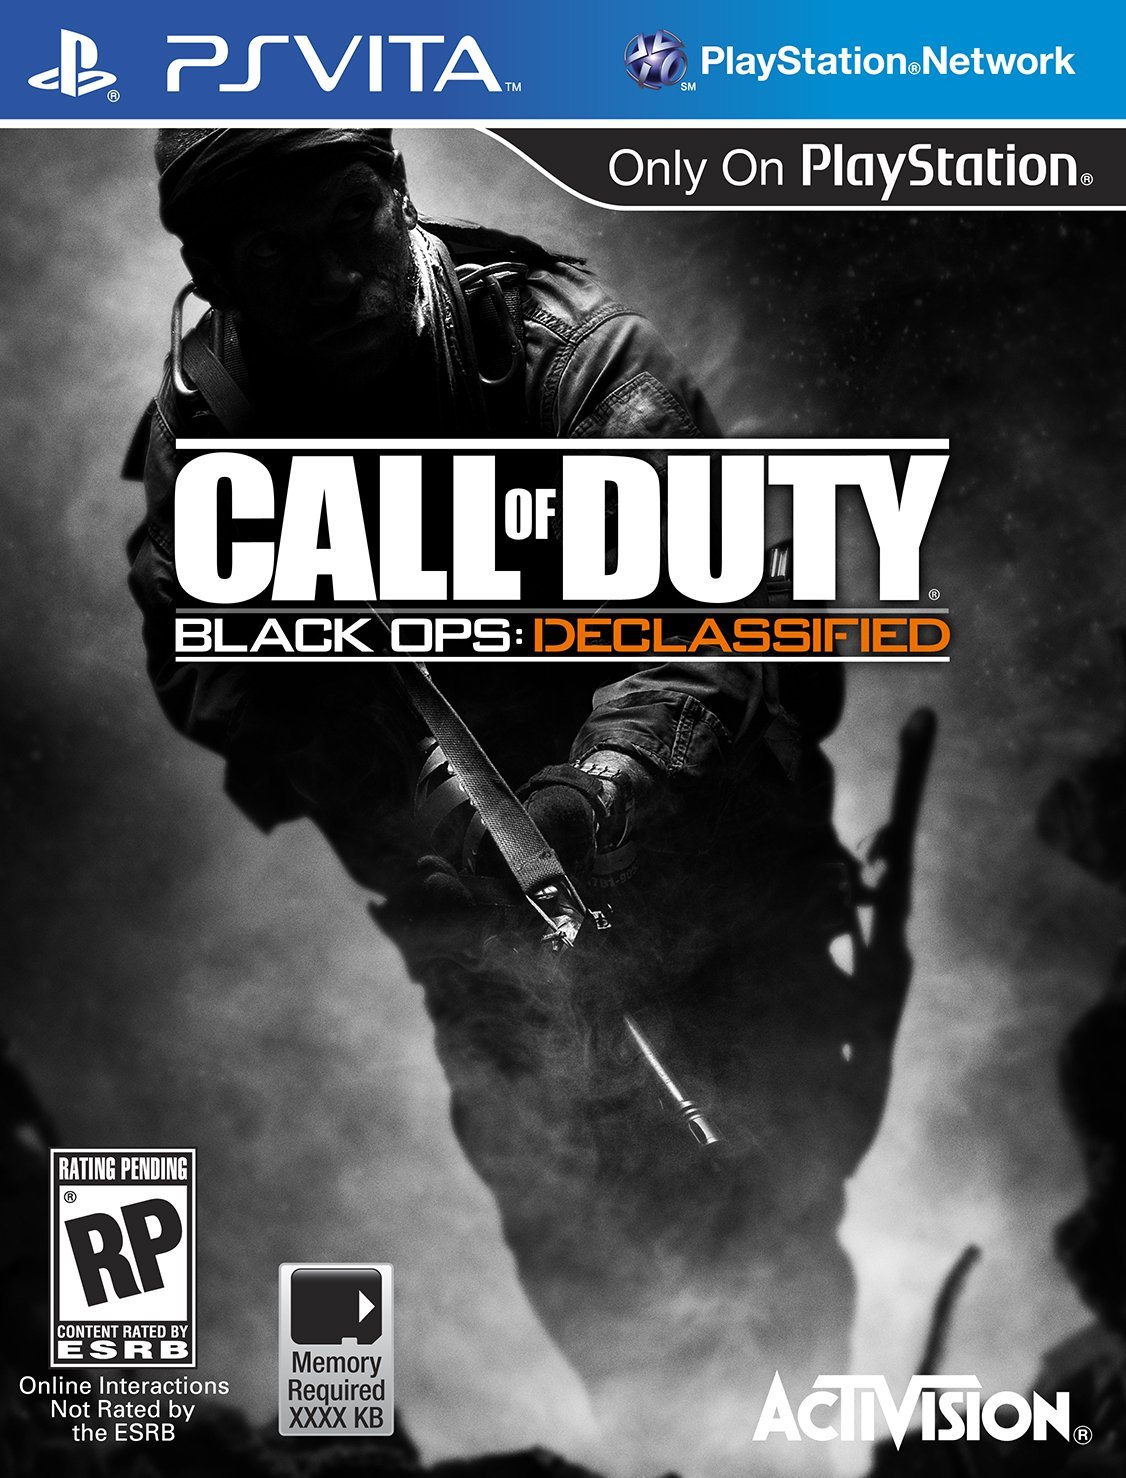 http://image.jeuxvideo.com/images/jaquettes/00039802/jaquette-call-of-duty-black-ops-declassified-playstation-vita-cover-avant-g-1340138380.jpg